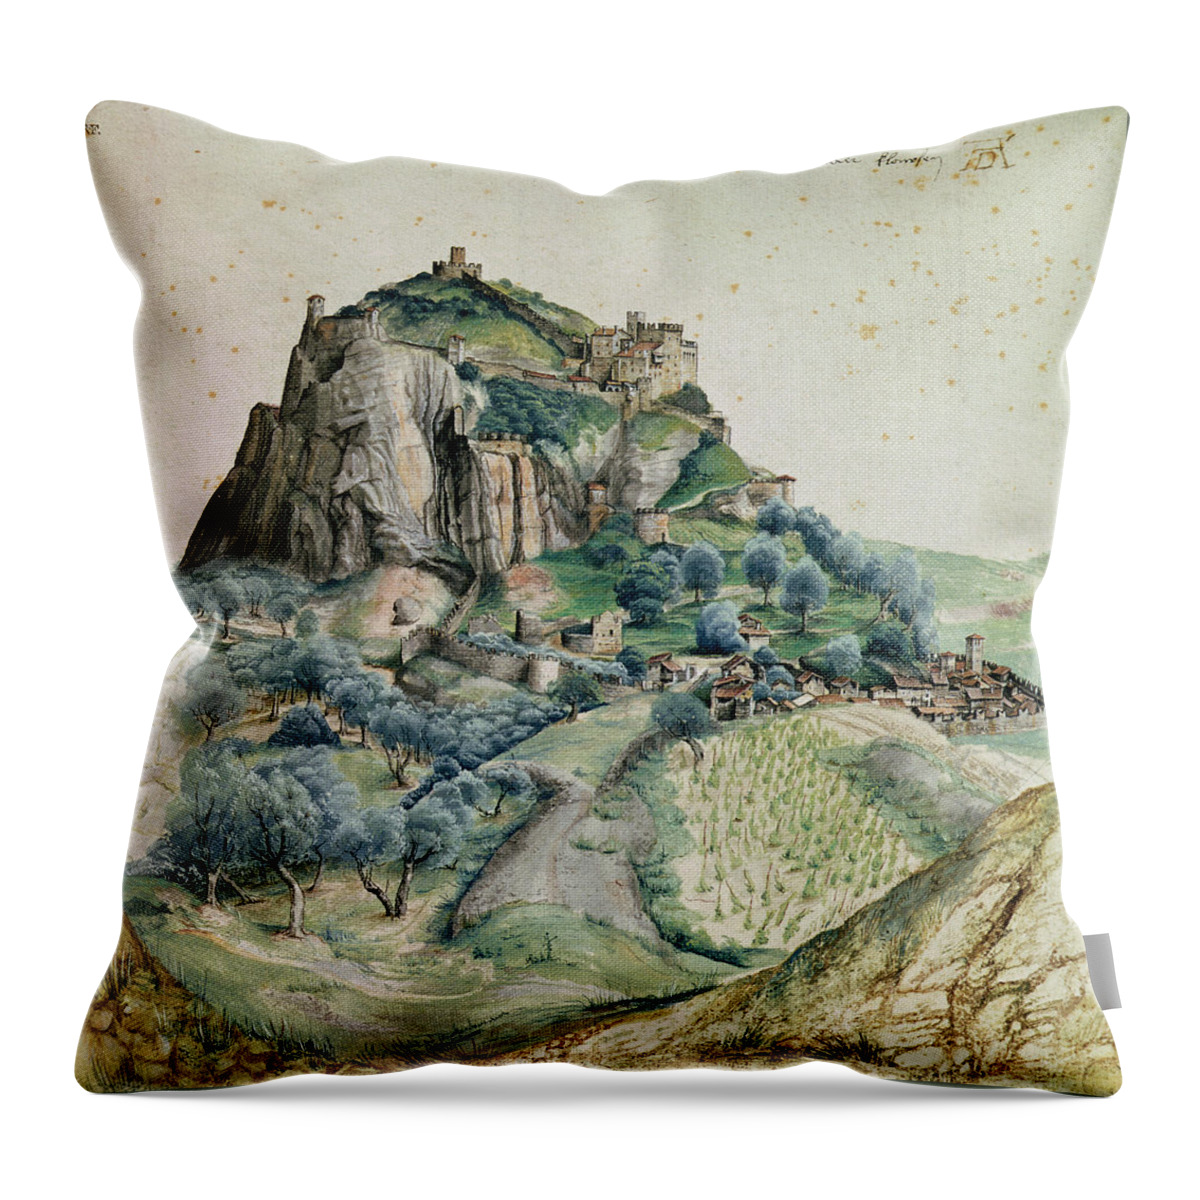 Albrecht Durer Throw Pillow featuring the painting View Of The Arco Valley In The Tyrol by MotionAge Designs